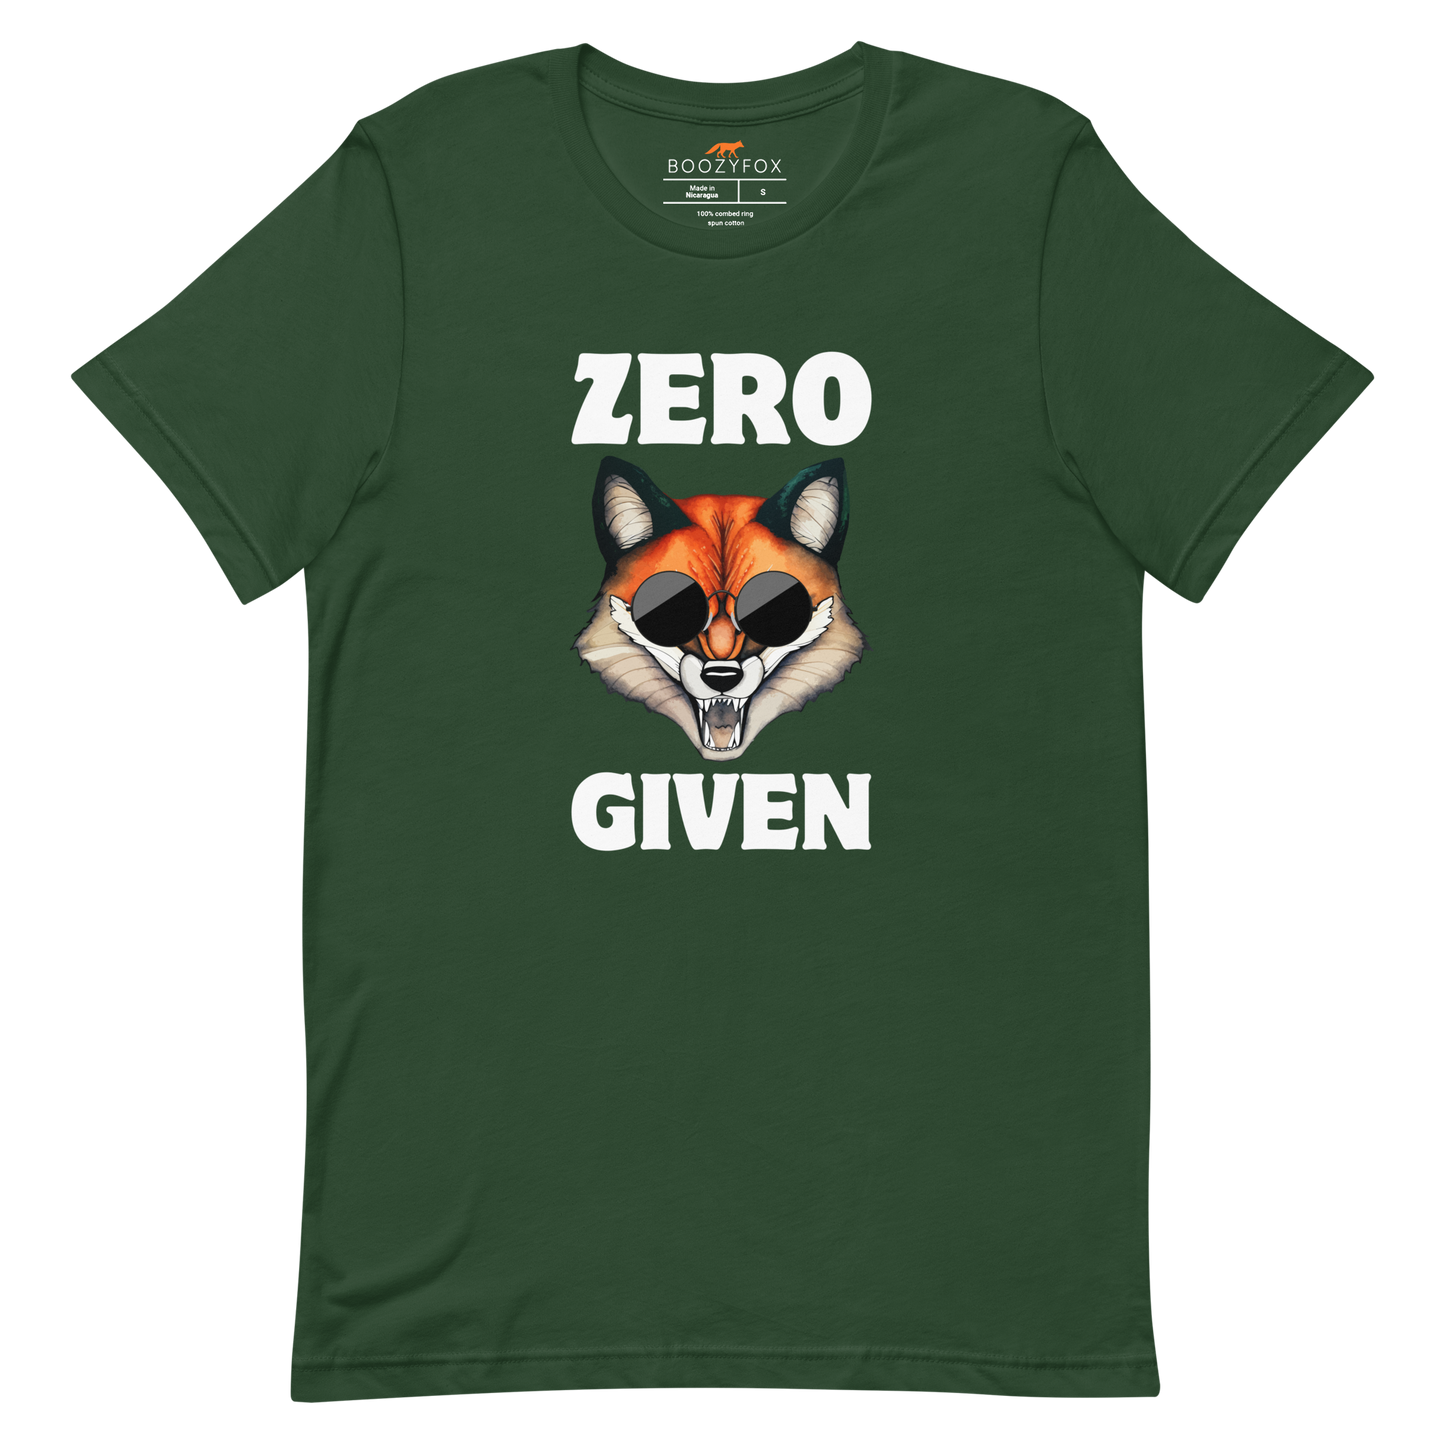 Forest Green Premium Fox Tee featuring a Zero Fox Given graphic on the chest - Funny Graphic Fox Tees - Boozy Fox